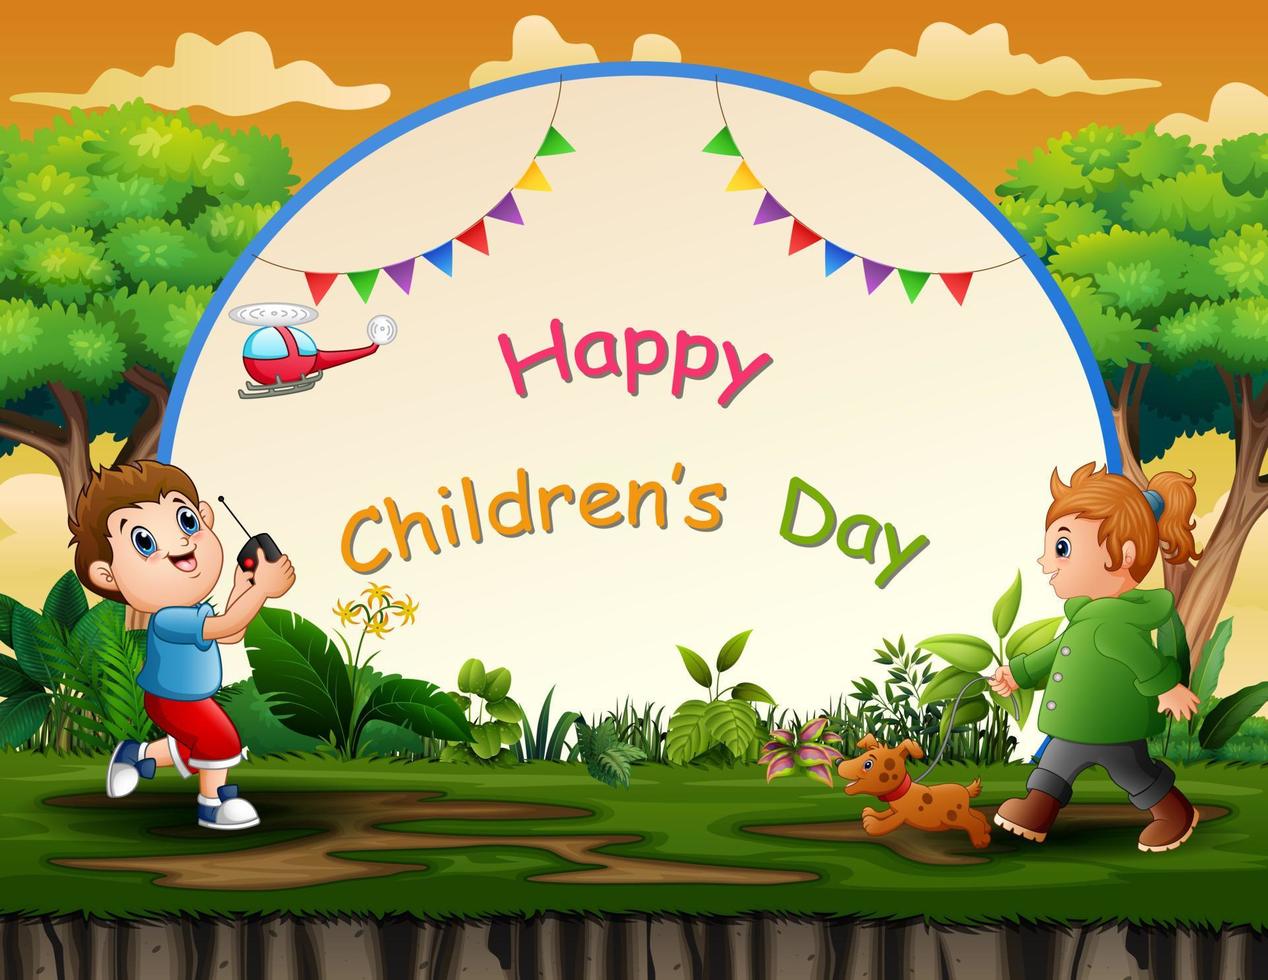 Happy children's day background with kids playing at park vector